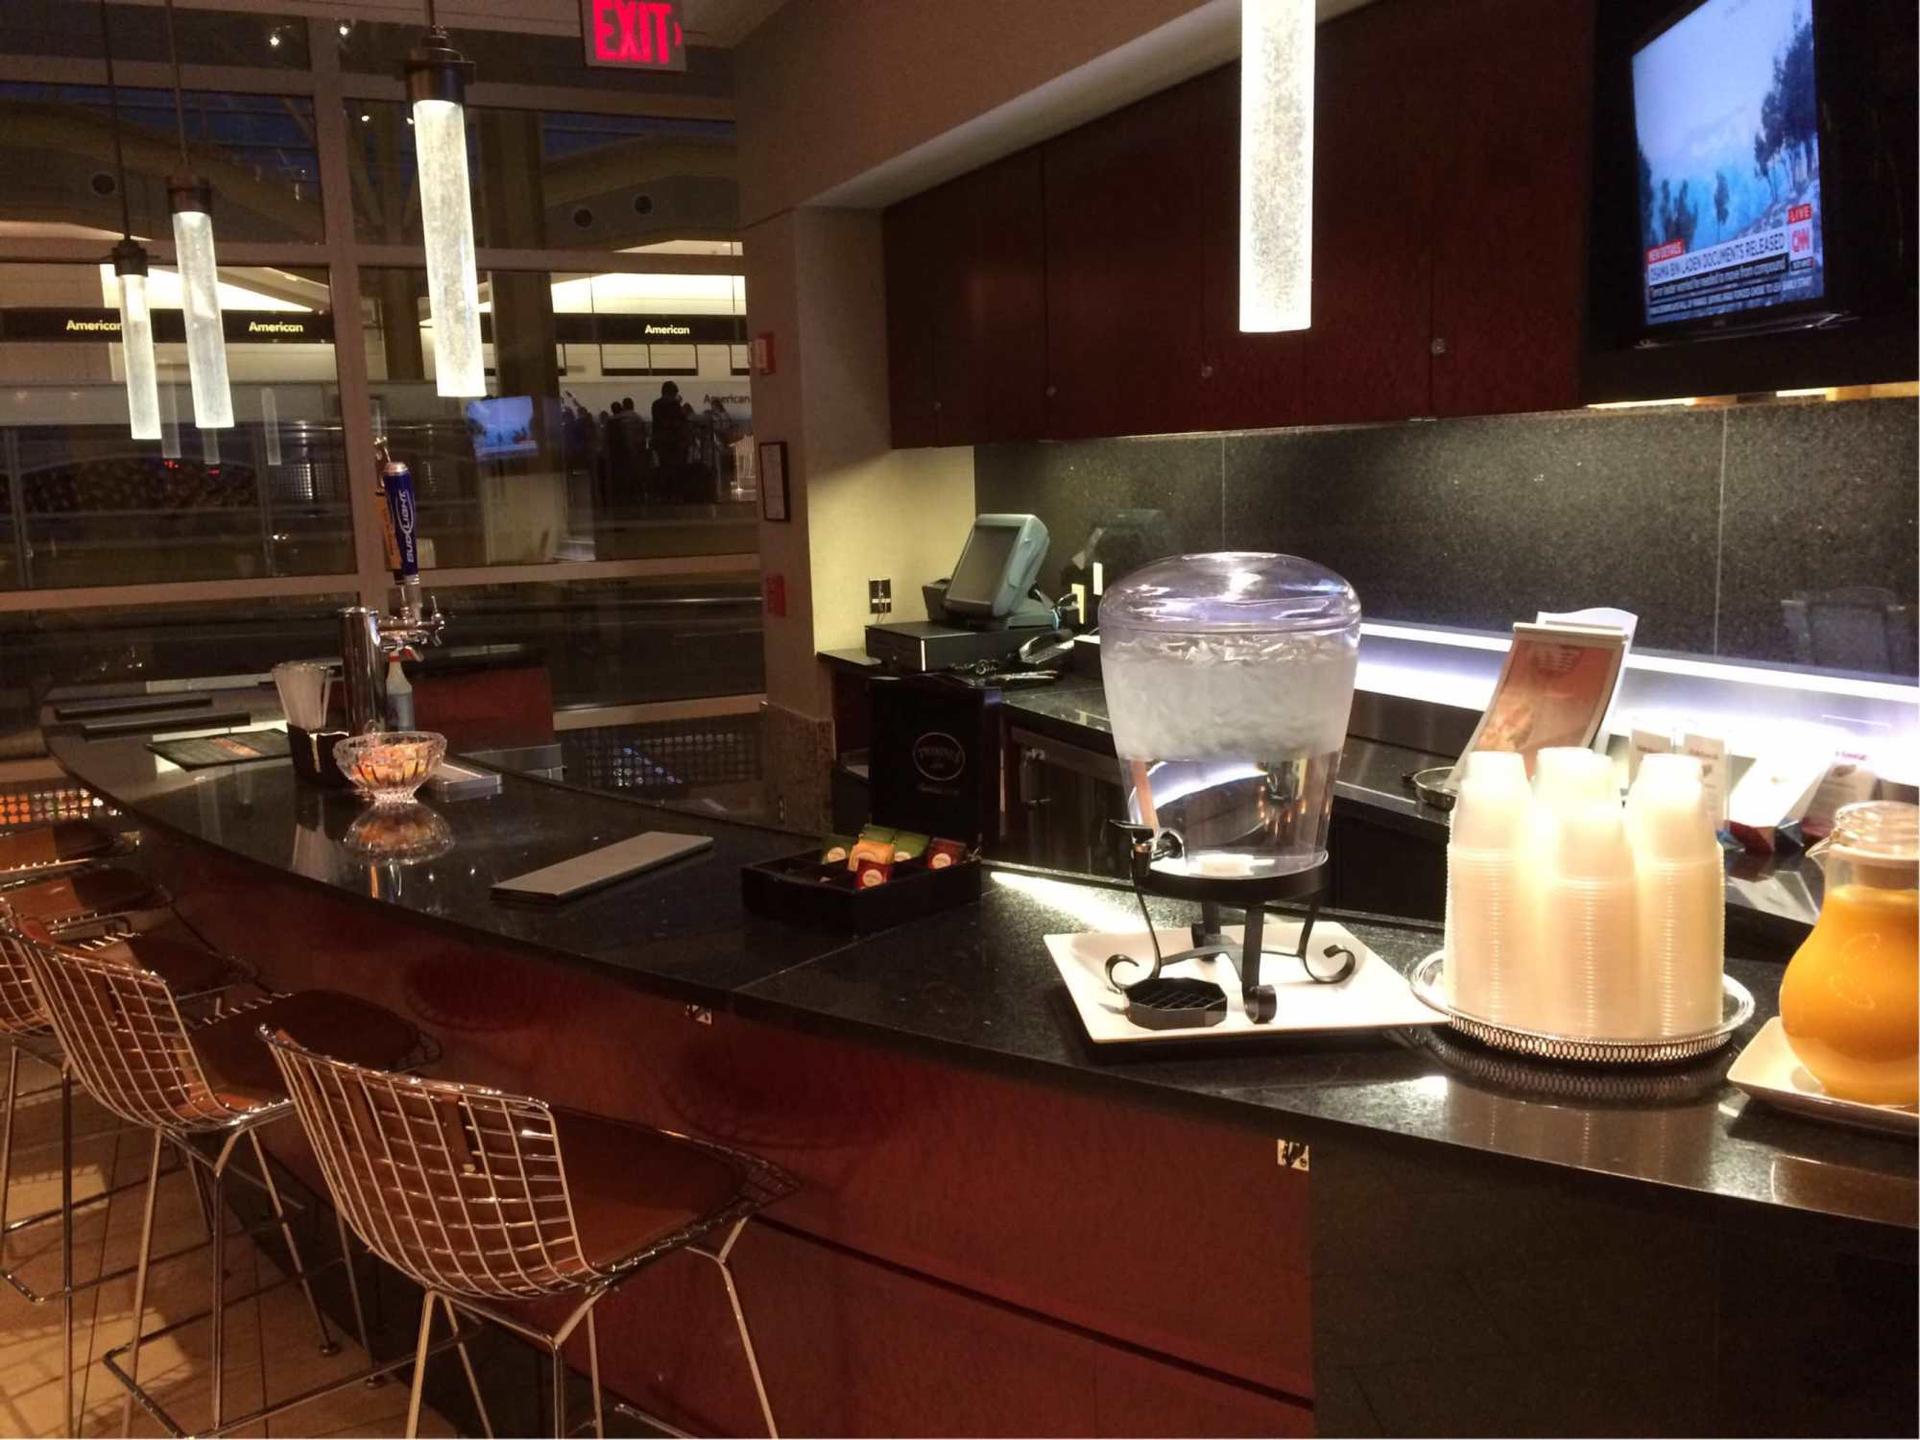 American Airlines Admirals Club image 6 of 22